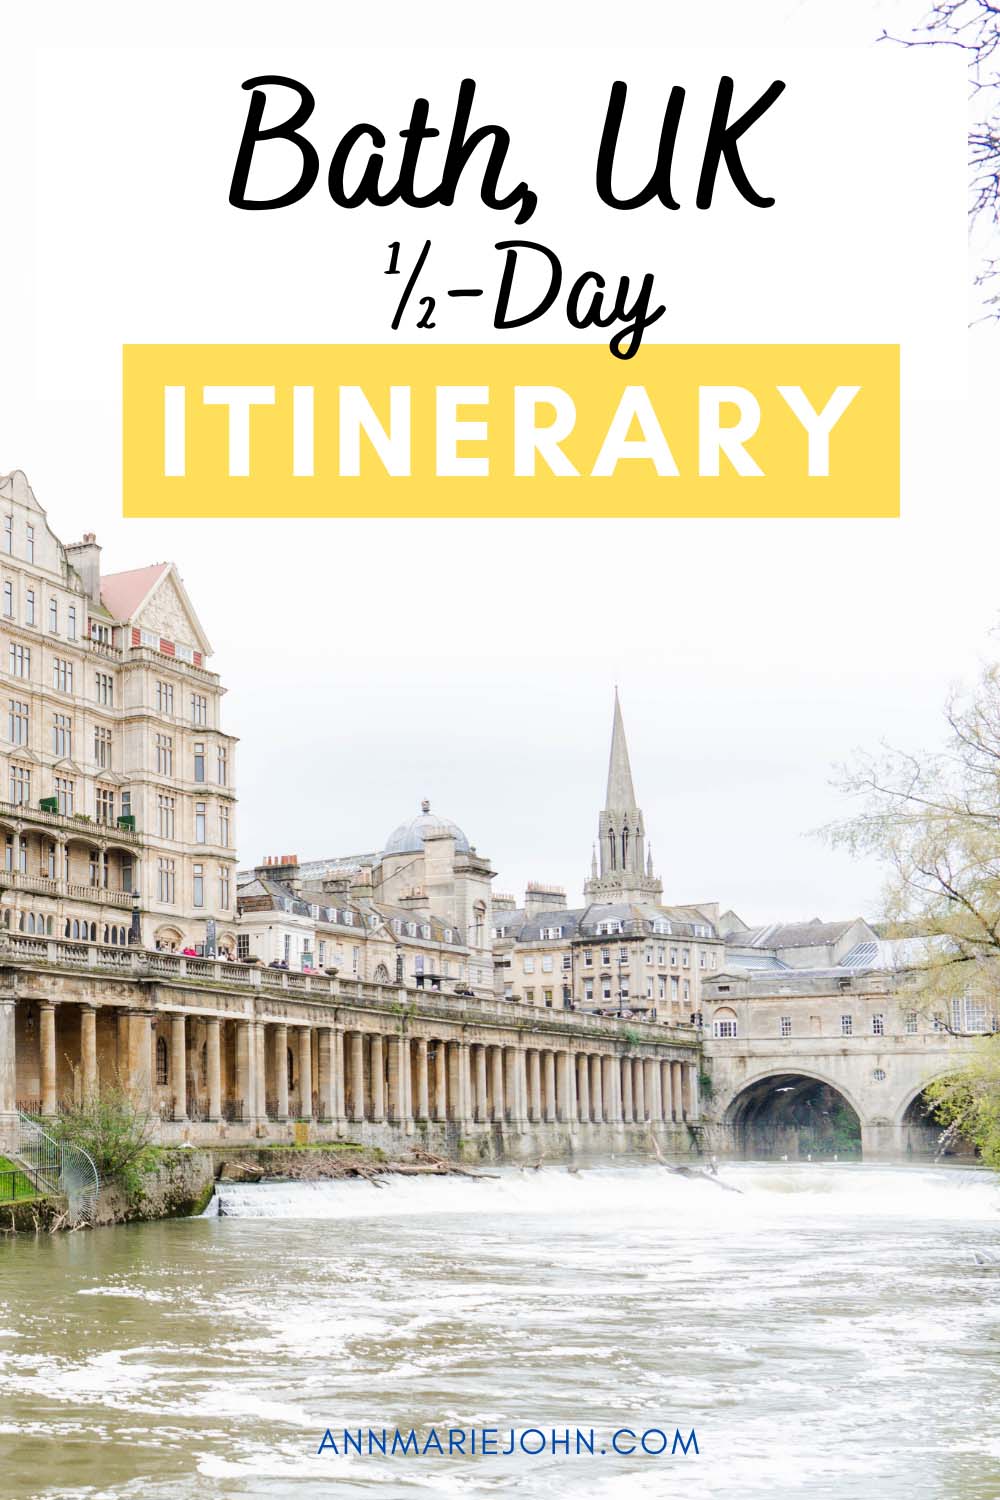 How to Spend Half a Day in Bath